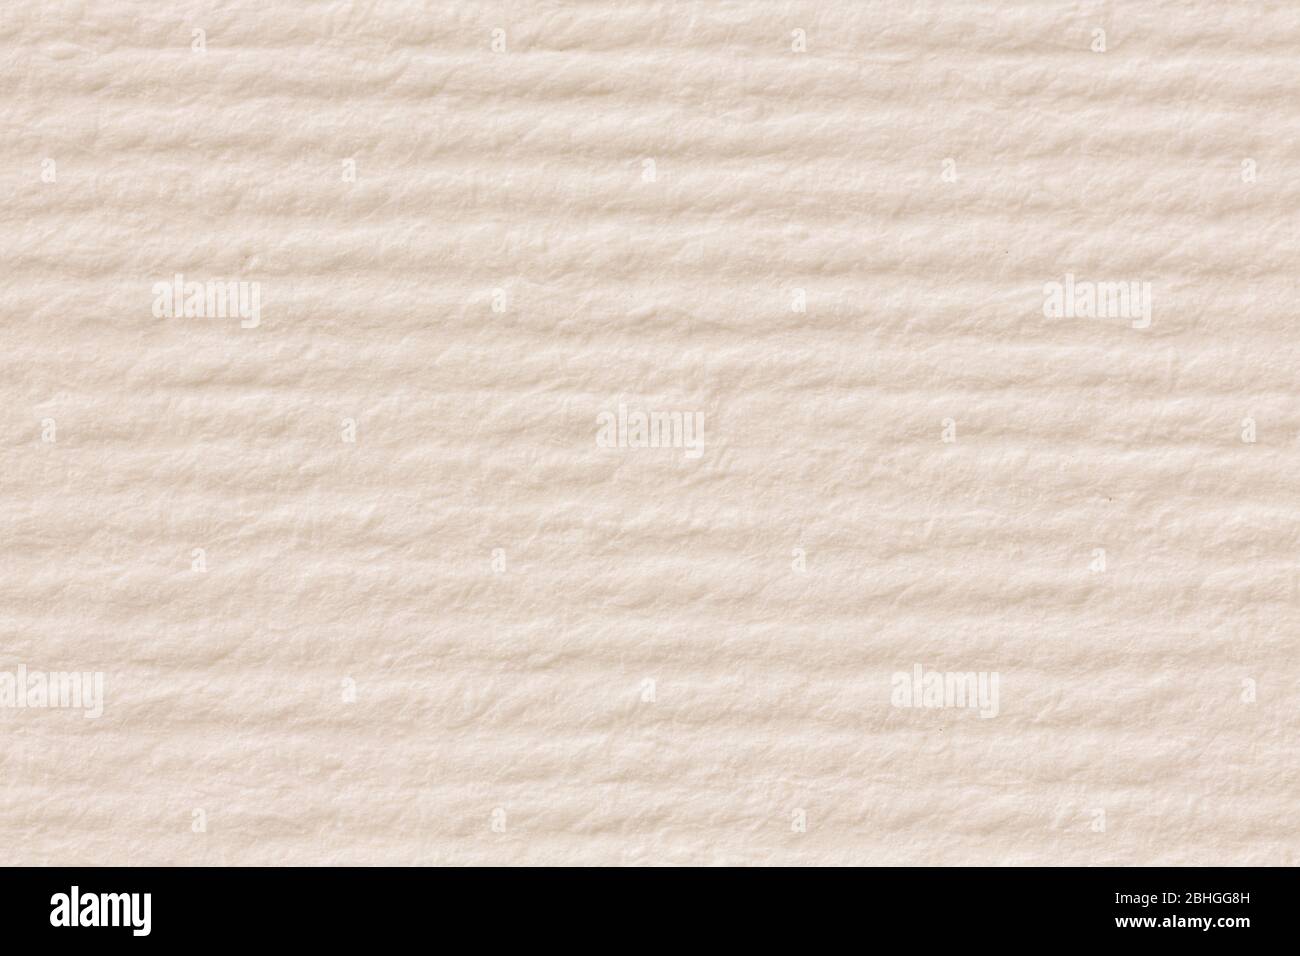 Stripped beige paper texture background close up. Stock Photo